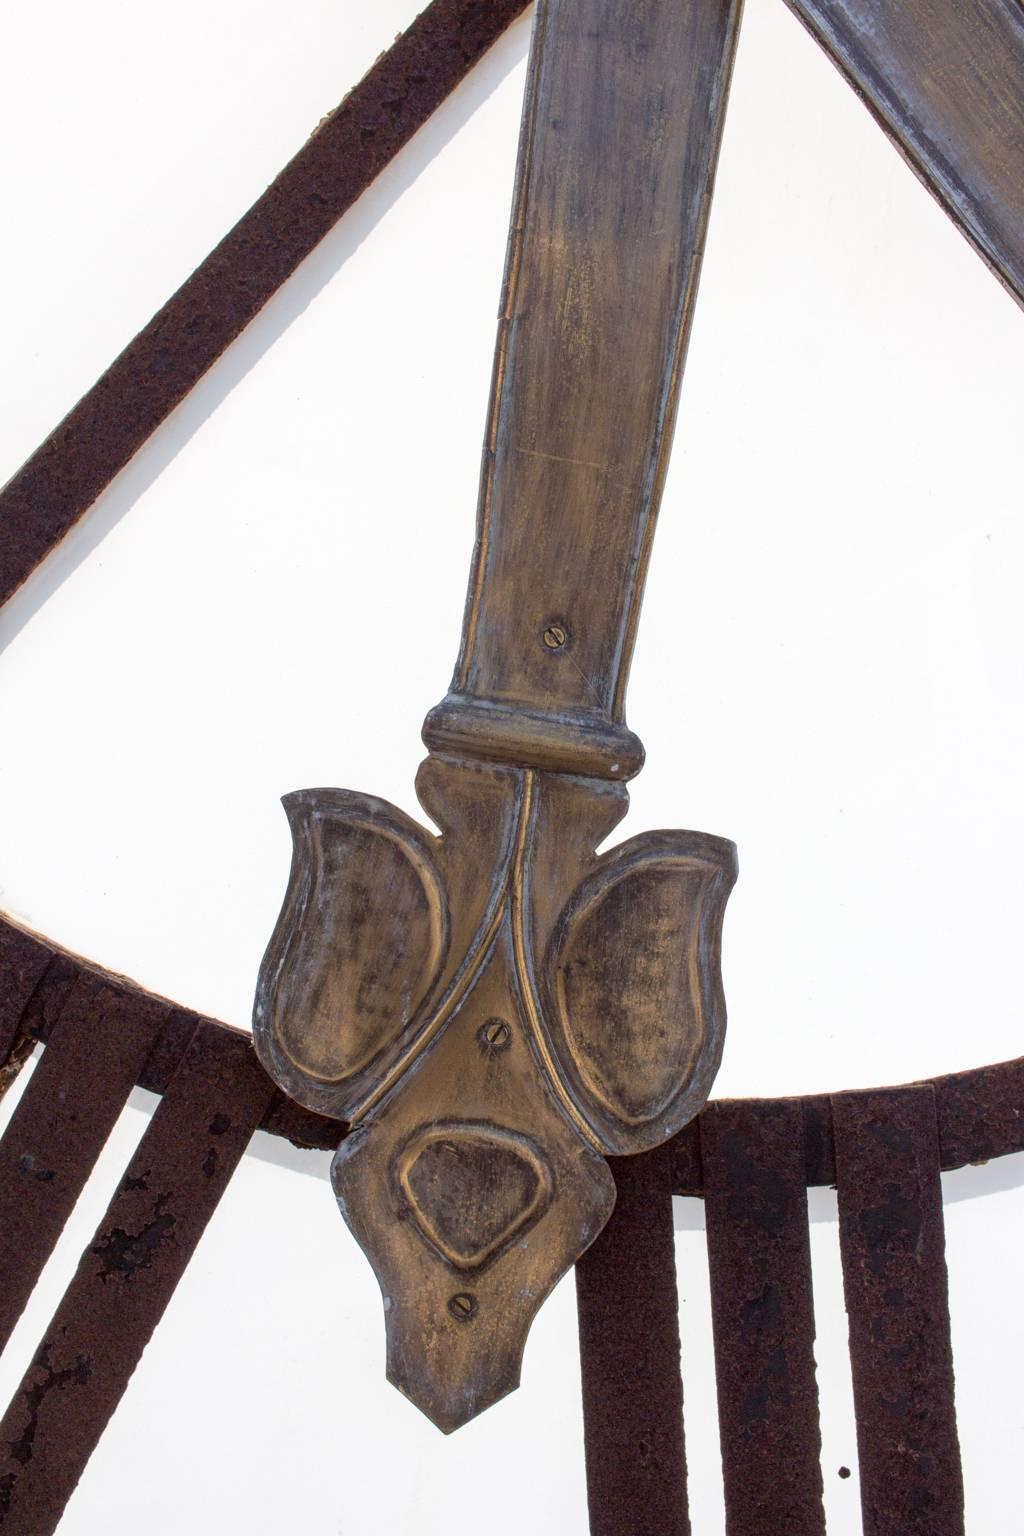 This stunning clock-face was removed from a French church tower and is crafted of iron and glass. The opaque white glass face provides beautiful contrast with the distressed iron face and hands. Discovered in France, this 19th century piece is sure